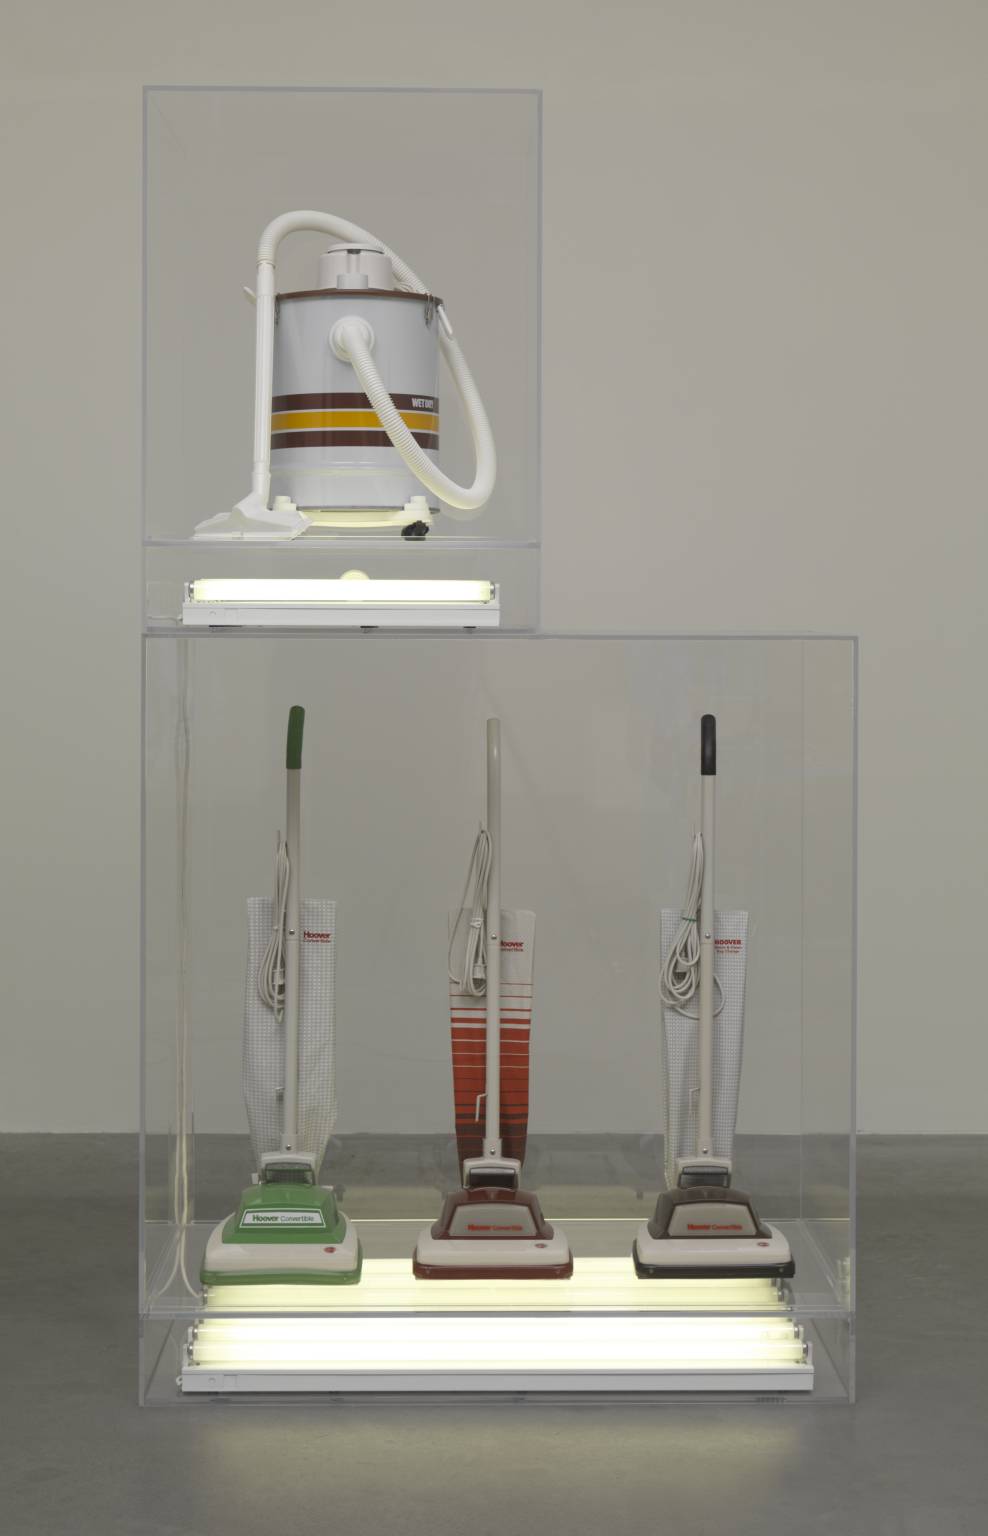 New Hoover Convertibles, Green, Red, Brown, New Shelton Wet/Dry 10 Gallon Displaced Doubledecker 1981-7 by Jeff Koons born 1955